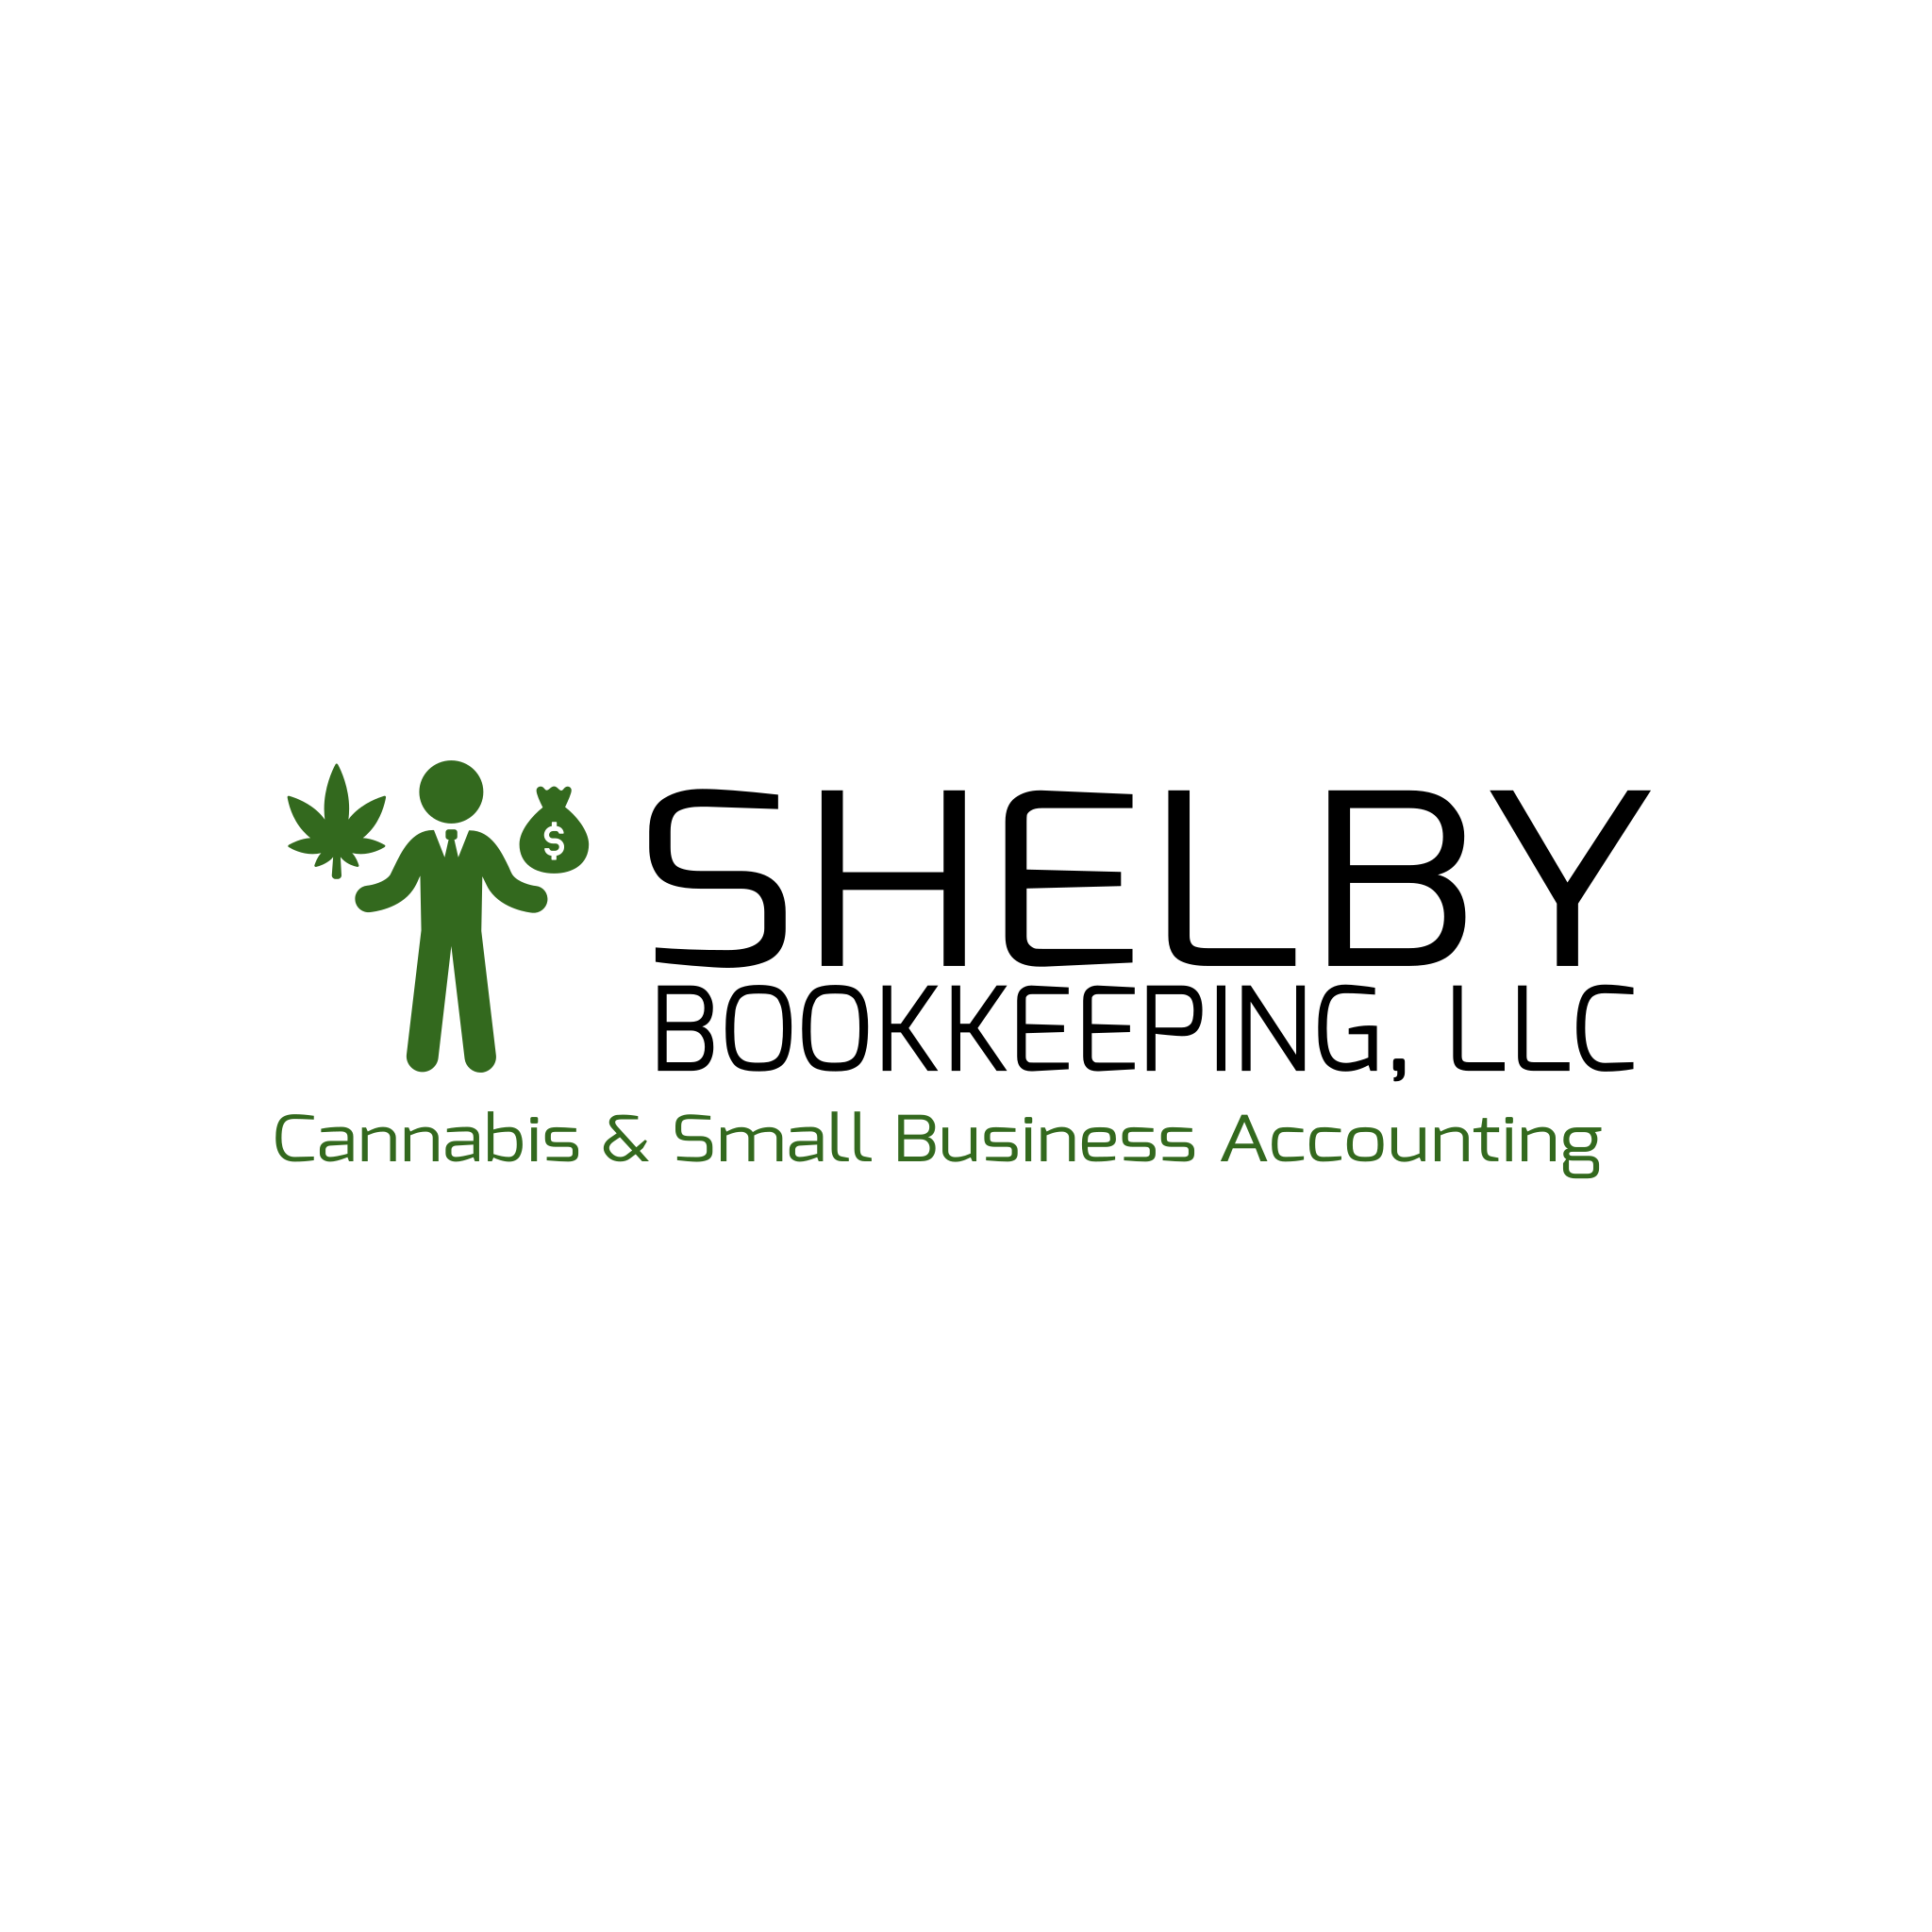 Shelby Bookkeeping, LLC